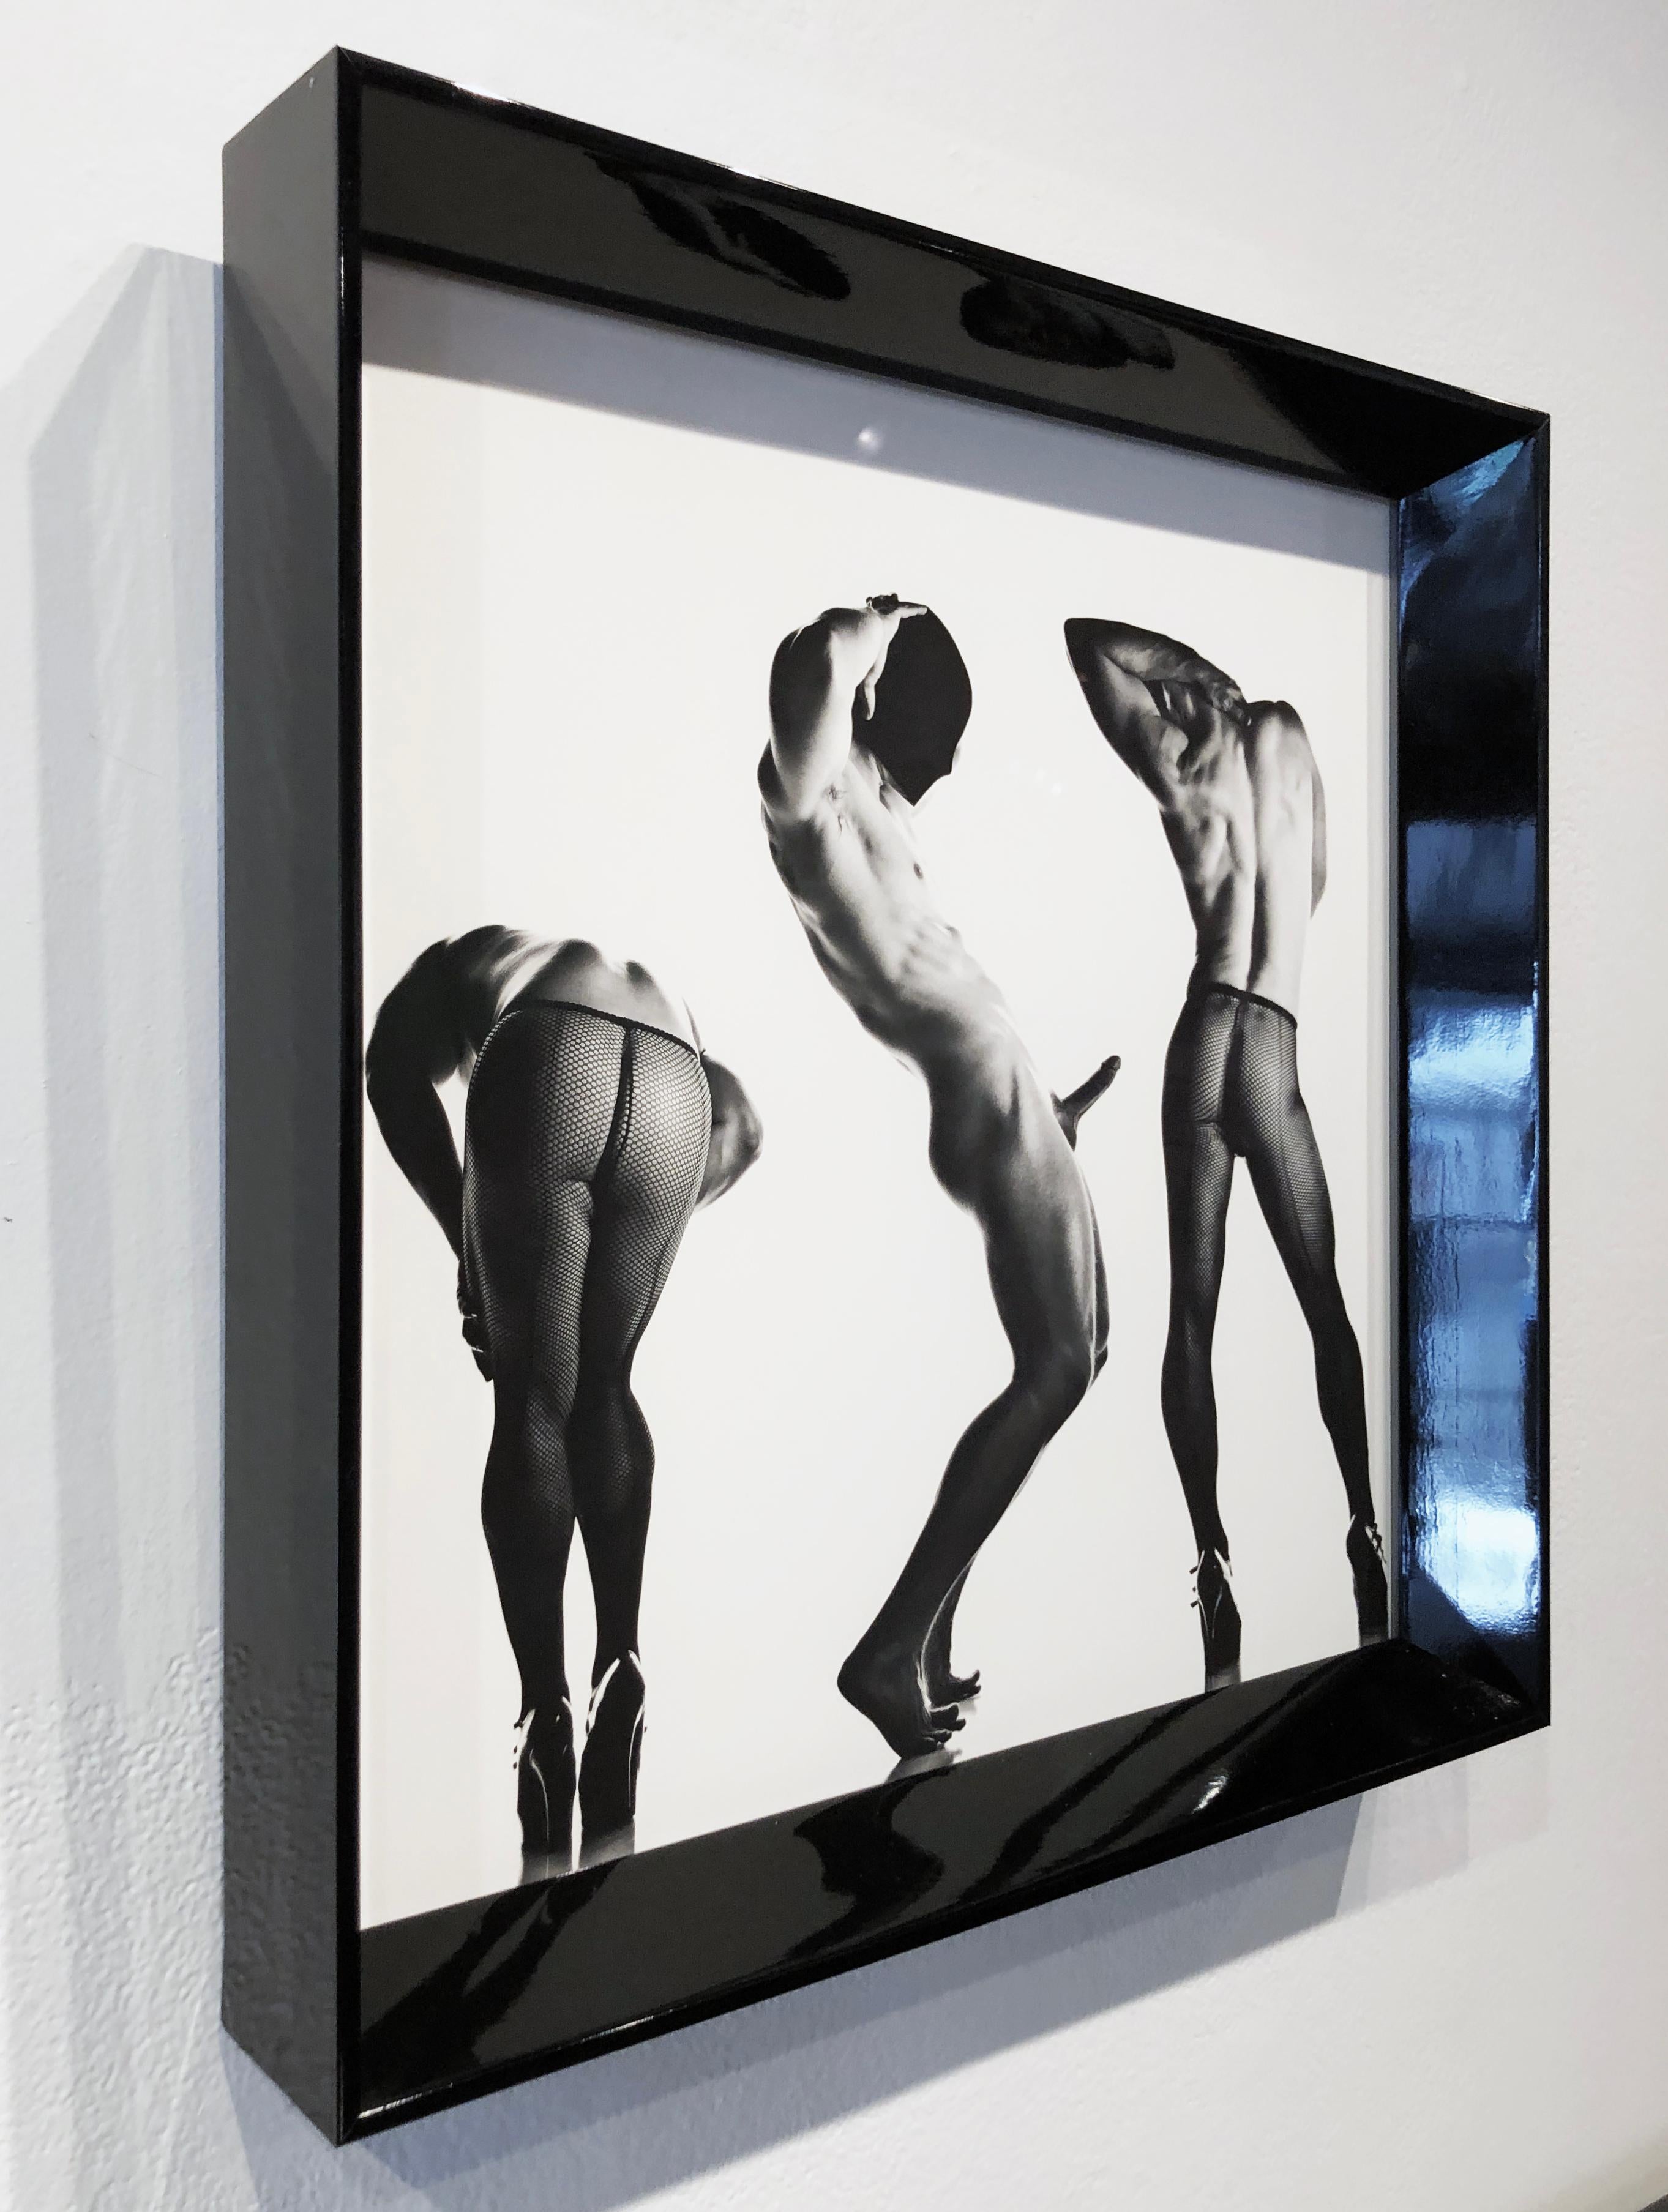 Sex 3 - Erotic Male Photo, Fishnet Stockings and High Heals, Matted and Framed - Contemporary Photograph by Doug Birkenheuer